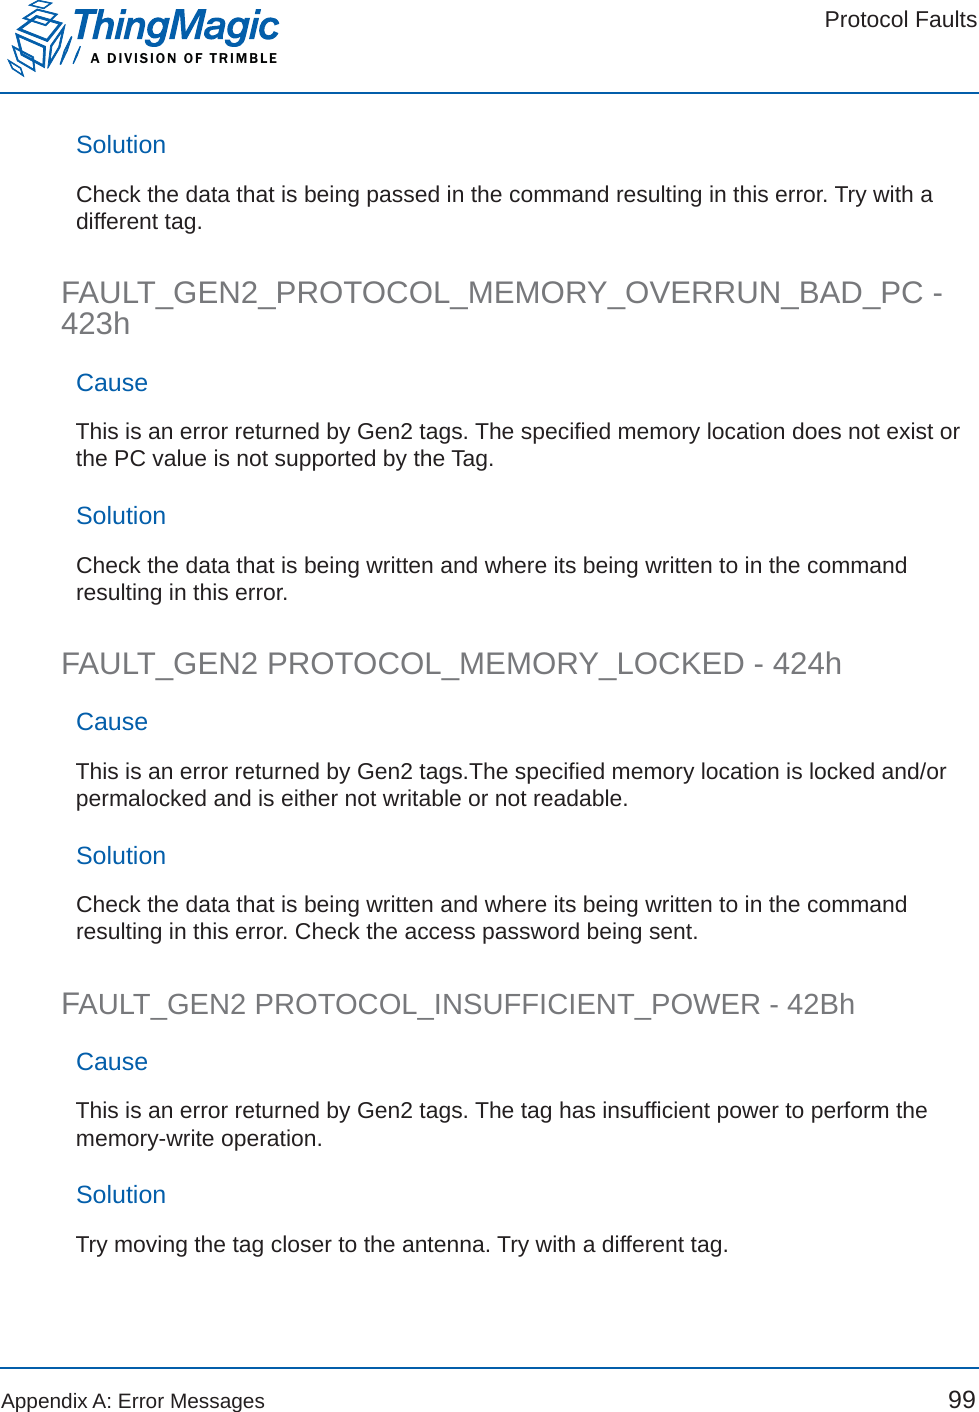 Protocol FaultsA DIVISION OF TRIMBLEAppendix A: Error Messages 99SolutionCheck the data that is being passed in the command resulting in this error. Try with a different tag.FAULT_GEN2_PROTOCOL_MEMORY_OVERRUN_BAD_PC - 423hCauseThis is an error returned by Gen2 tags. The specified memory location does not exist or the PC value is not supported by the Tag. SolutionCheck the data that is being written and where its being written to in the command resulting in this error.FAULT_GEN2 PROTOCOL_MEMORY_LOCKED - 424hCauseThis is an error returned by Gen2 tags.The specified memory location is locked and/or permalocked and is either not writable or not readable.SolutionCheck the data that is being written and where its being written to in the command resulting in this error. Check the access password being sent.FAULT_GEN2 PROTOCOL_INSUFFICIENT_POWER - 42BhCauseThis is an error returned by Gen2 tags. The tag has insufficient power to perform the memory-write operation.SolutionTry moving the tag closer to the antenna. Try with a different tag.